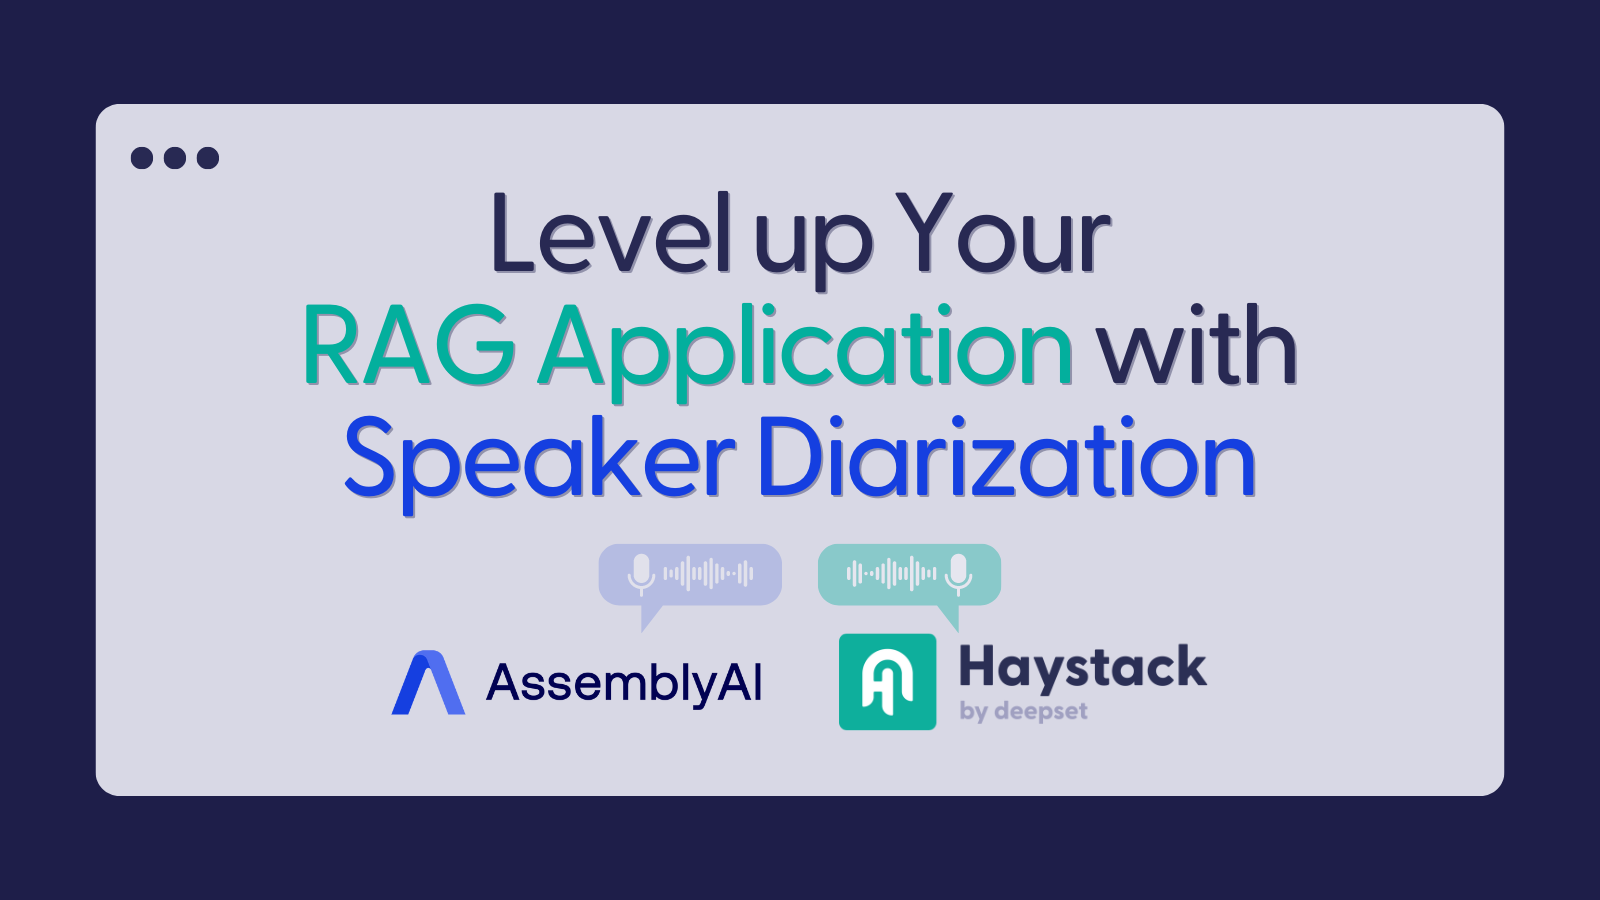 Level up Your RAG Application with Speaker Diarization